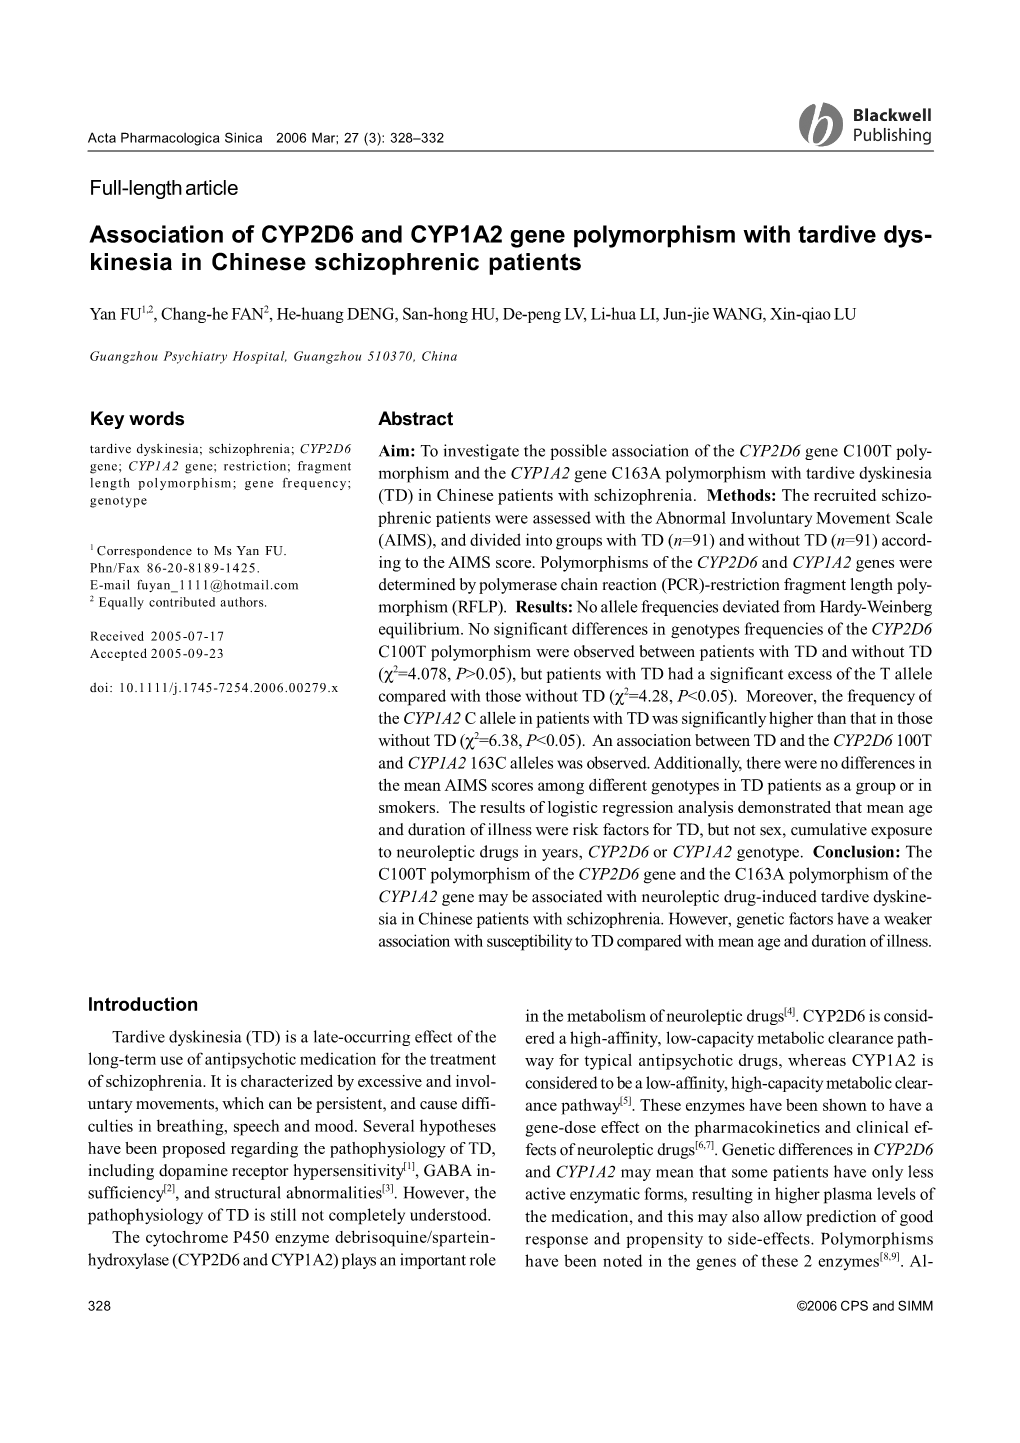 Association of CYP2D6 and CYP1A2 Gene Polymorphism with Tardive Dys- Kinesia in Chinese Schizophrenic Patients